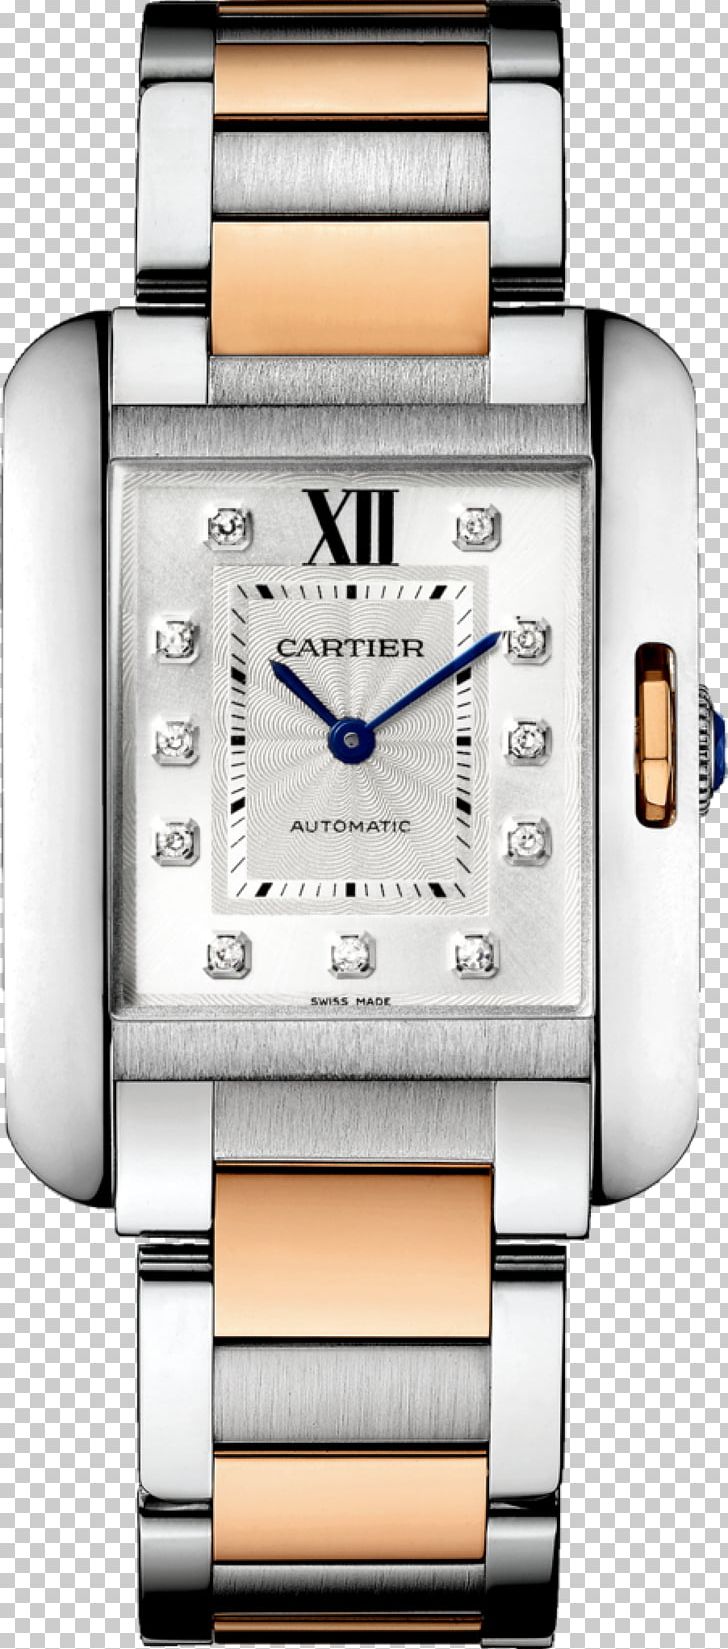 Cartier Tank Anglaise Watch Gold PNG, Clipart, Accessories, Automatic ...